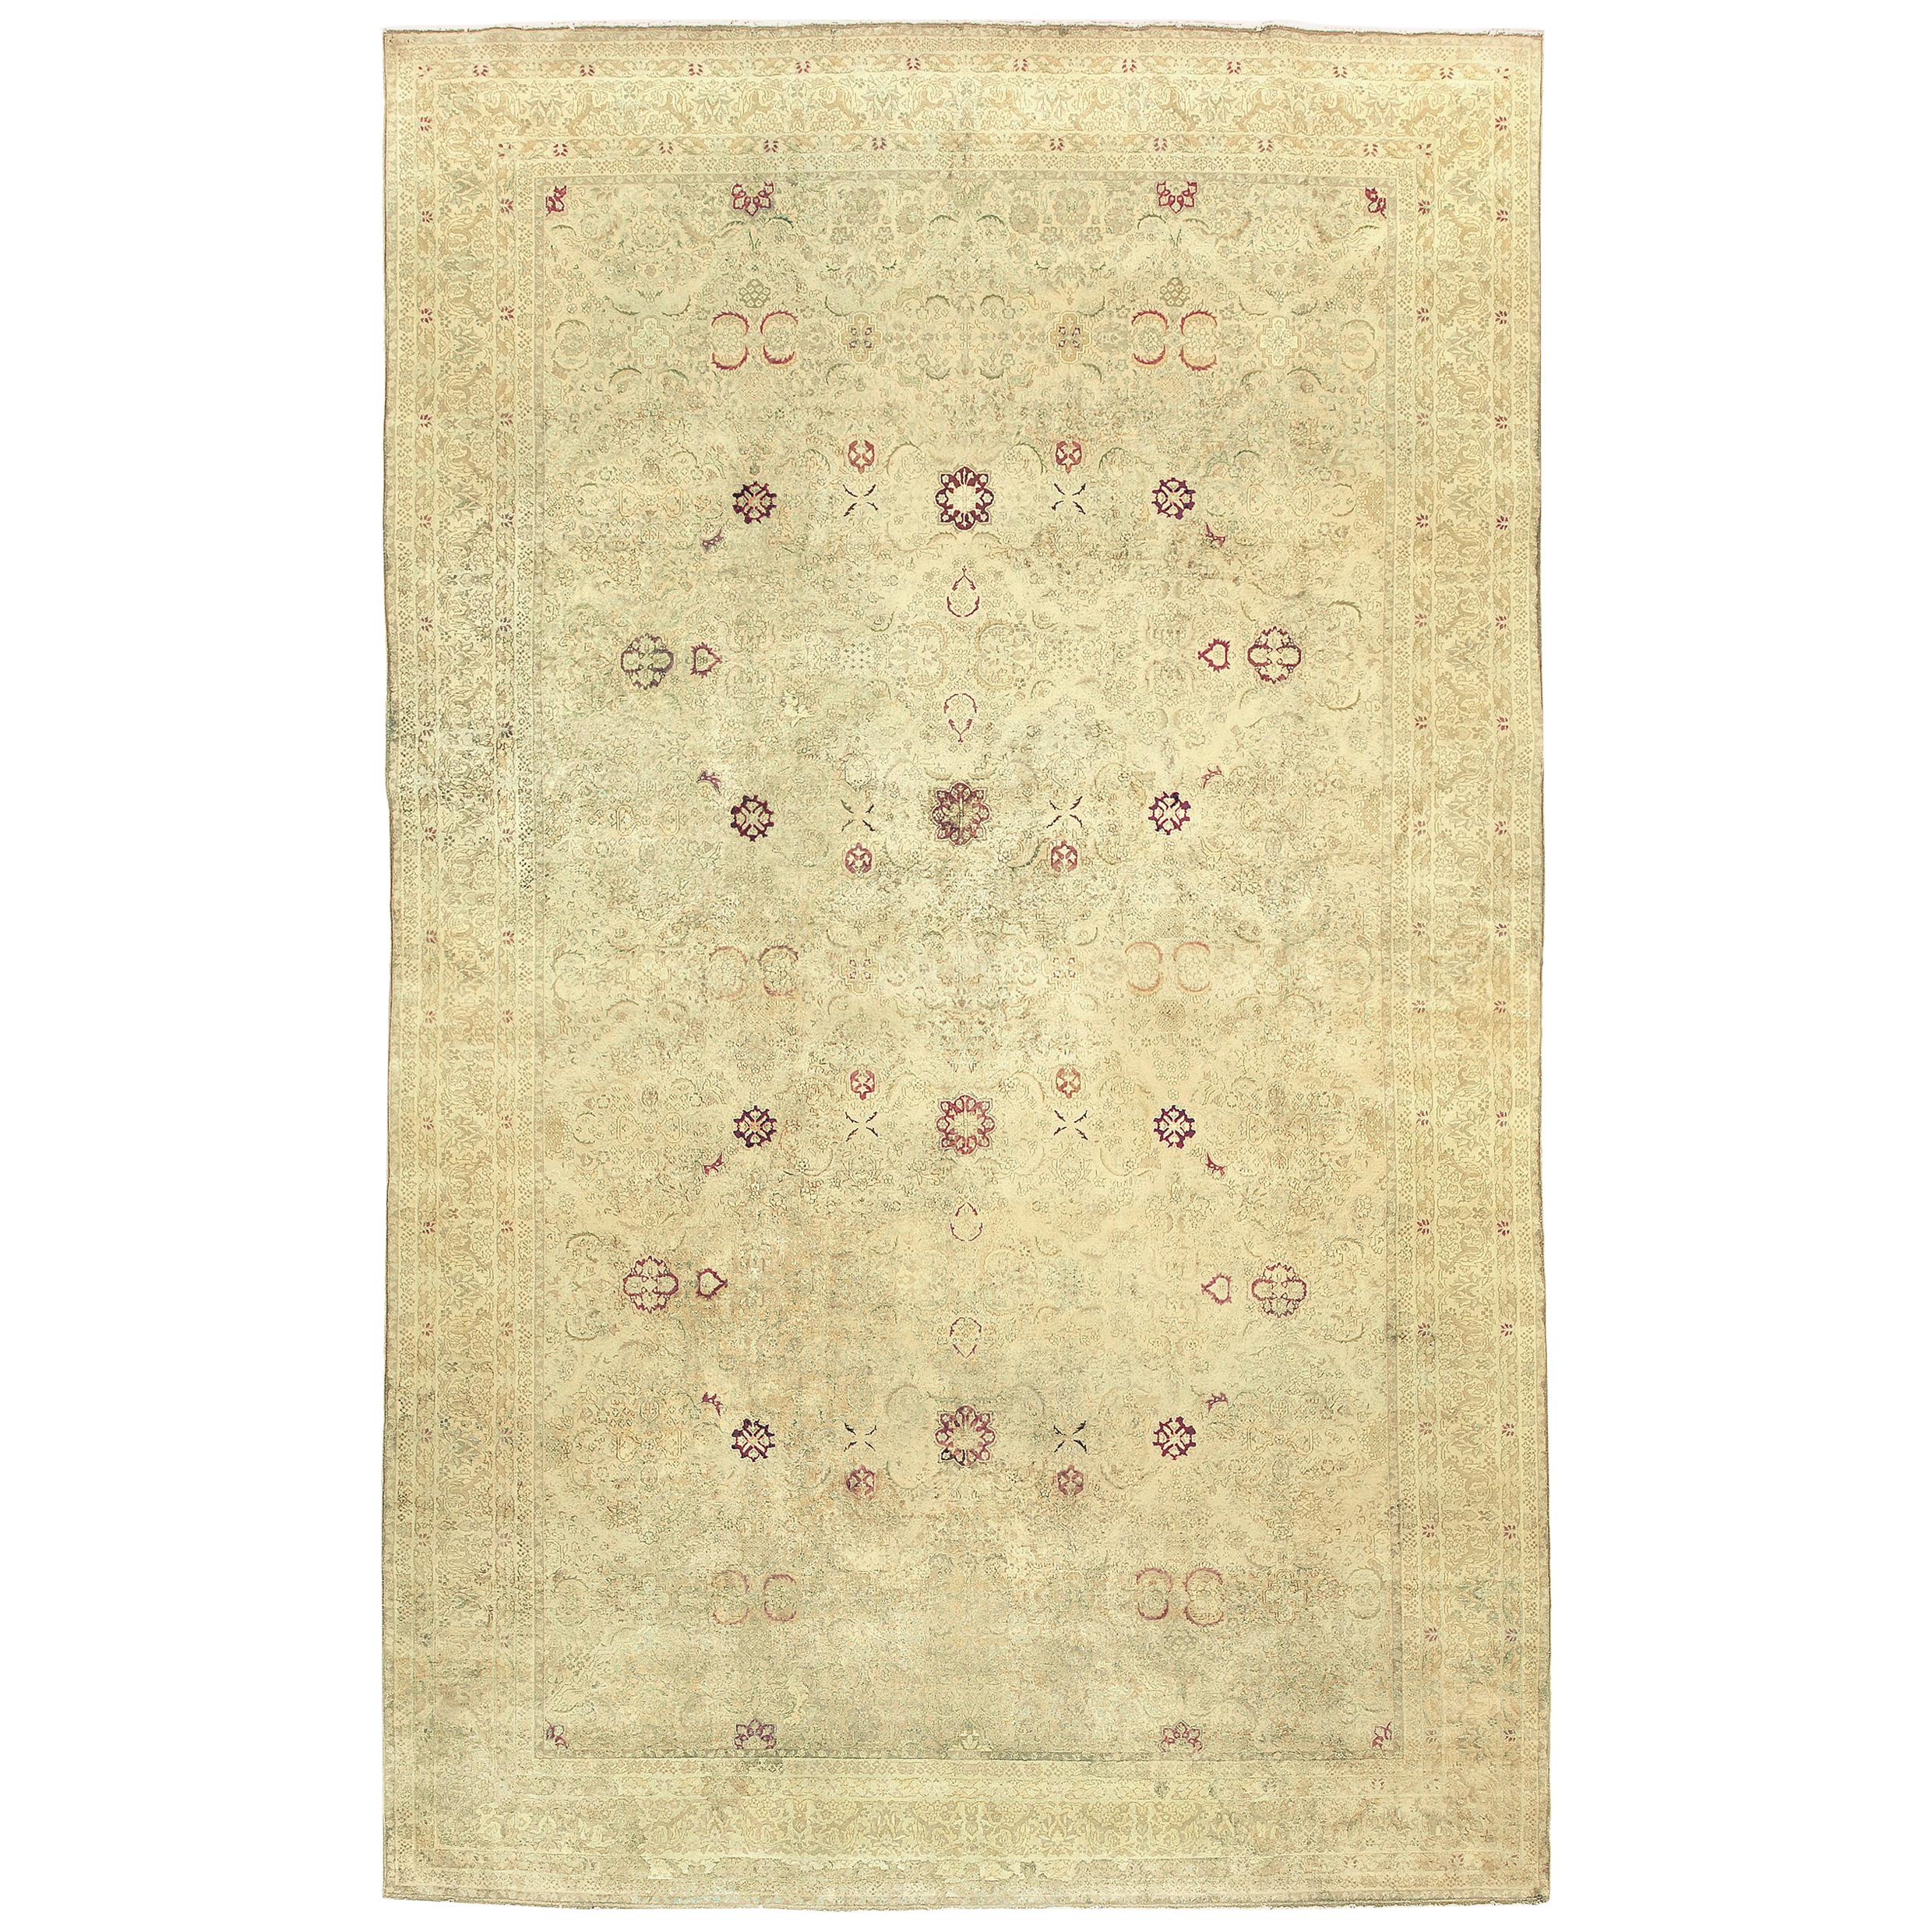 Early 20th Century Indian Amritsar Rug For Sale